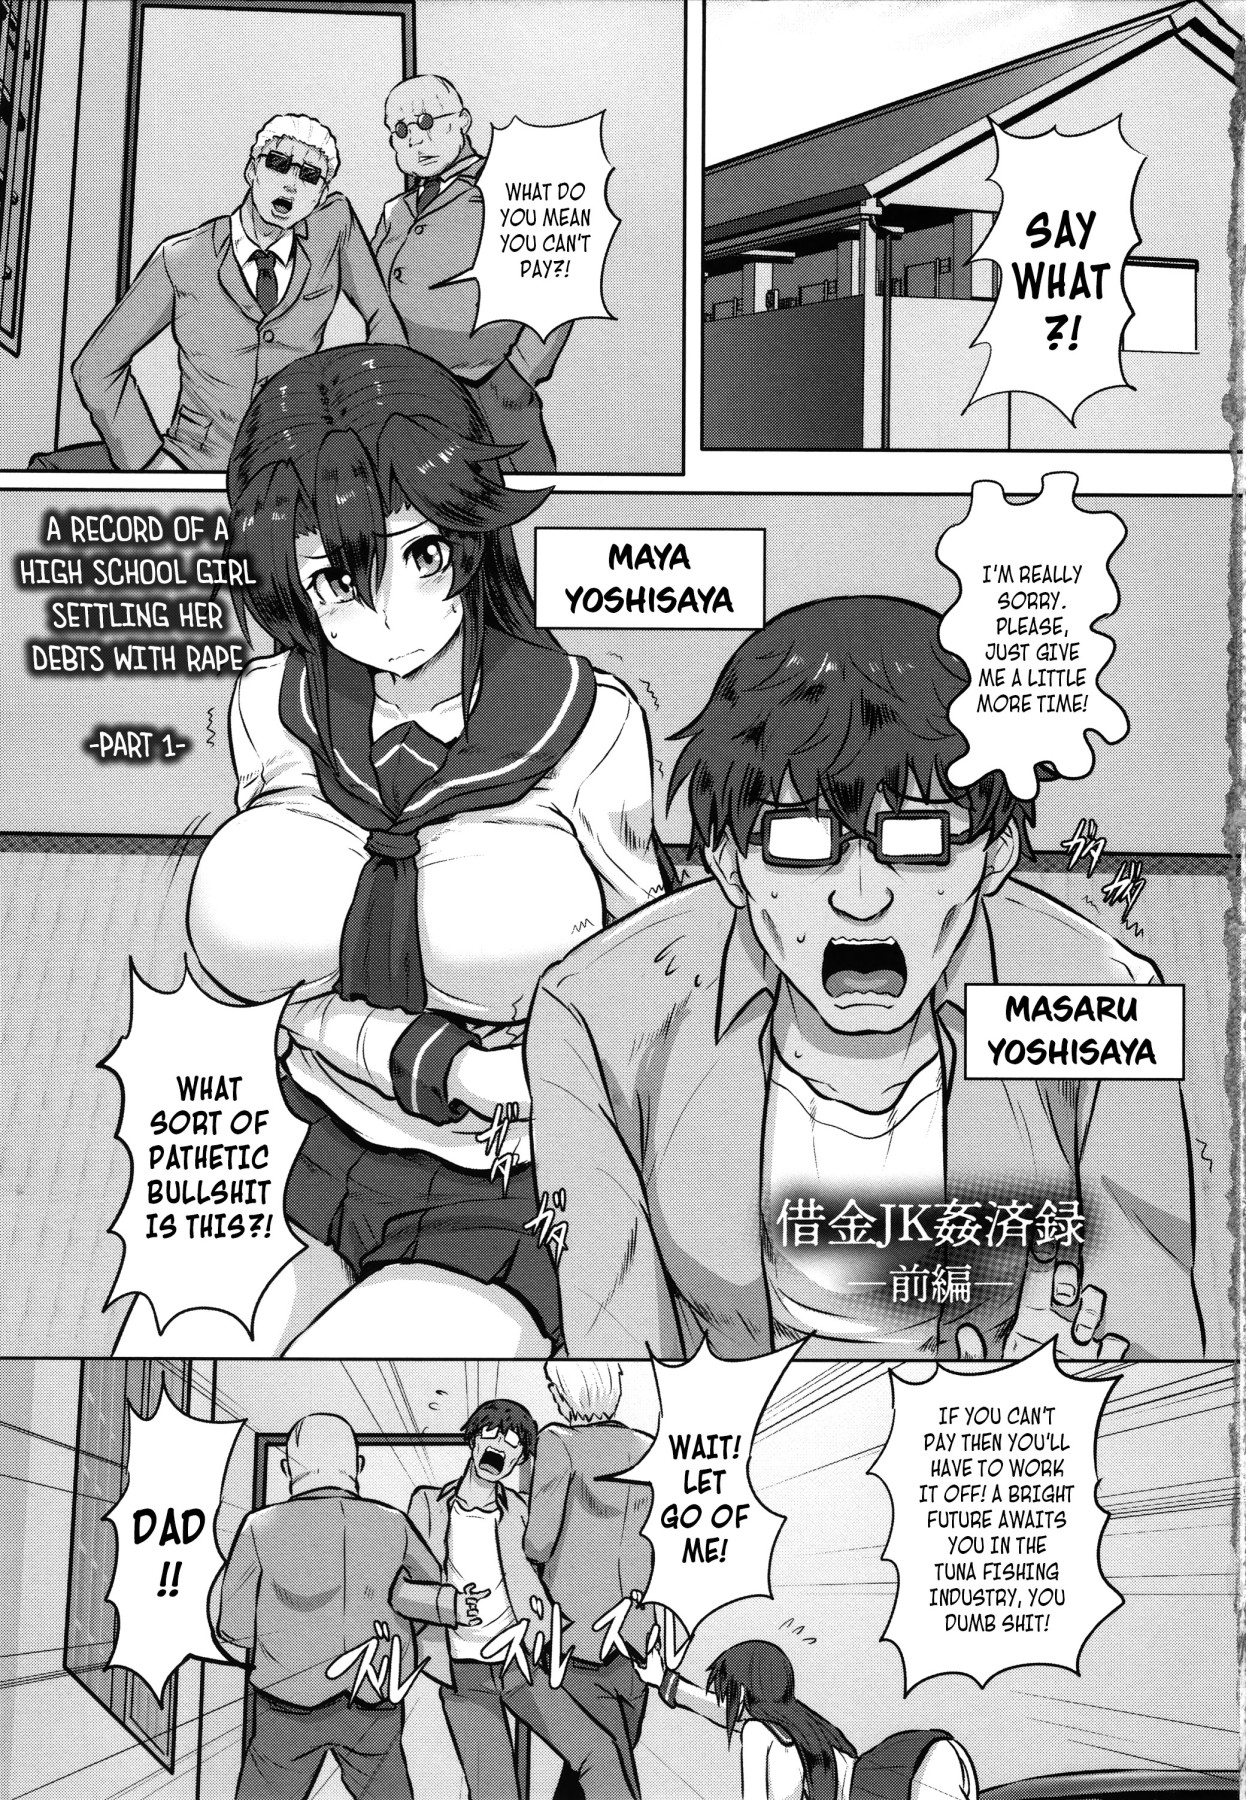 Hentai Manga Comic-A Record of a High School Girl Settling Her Debts With Rape --Chapter 1-1